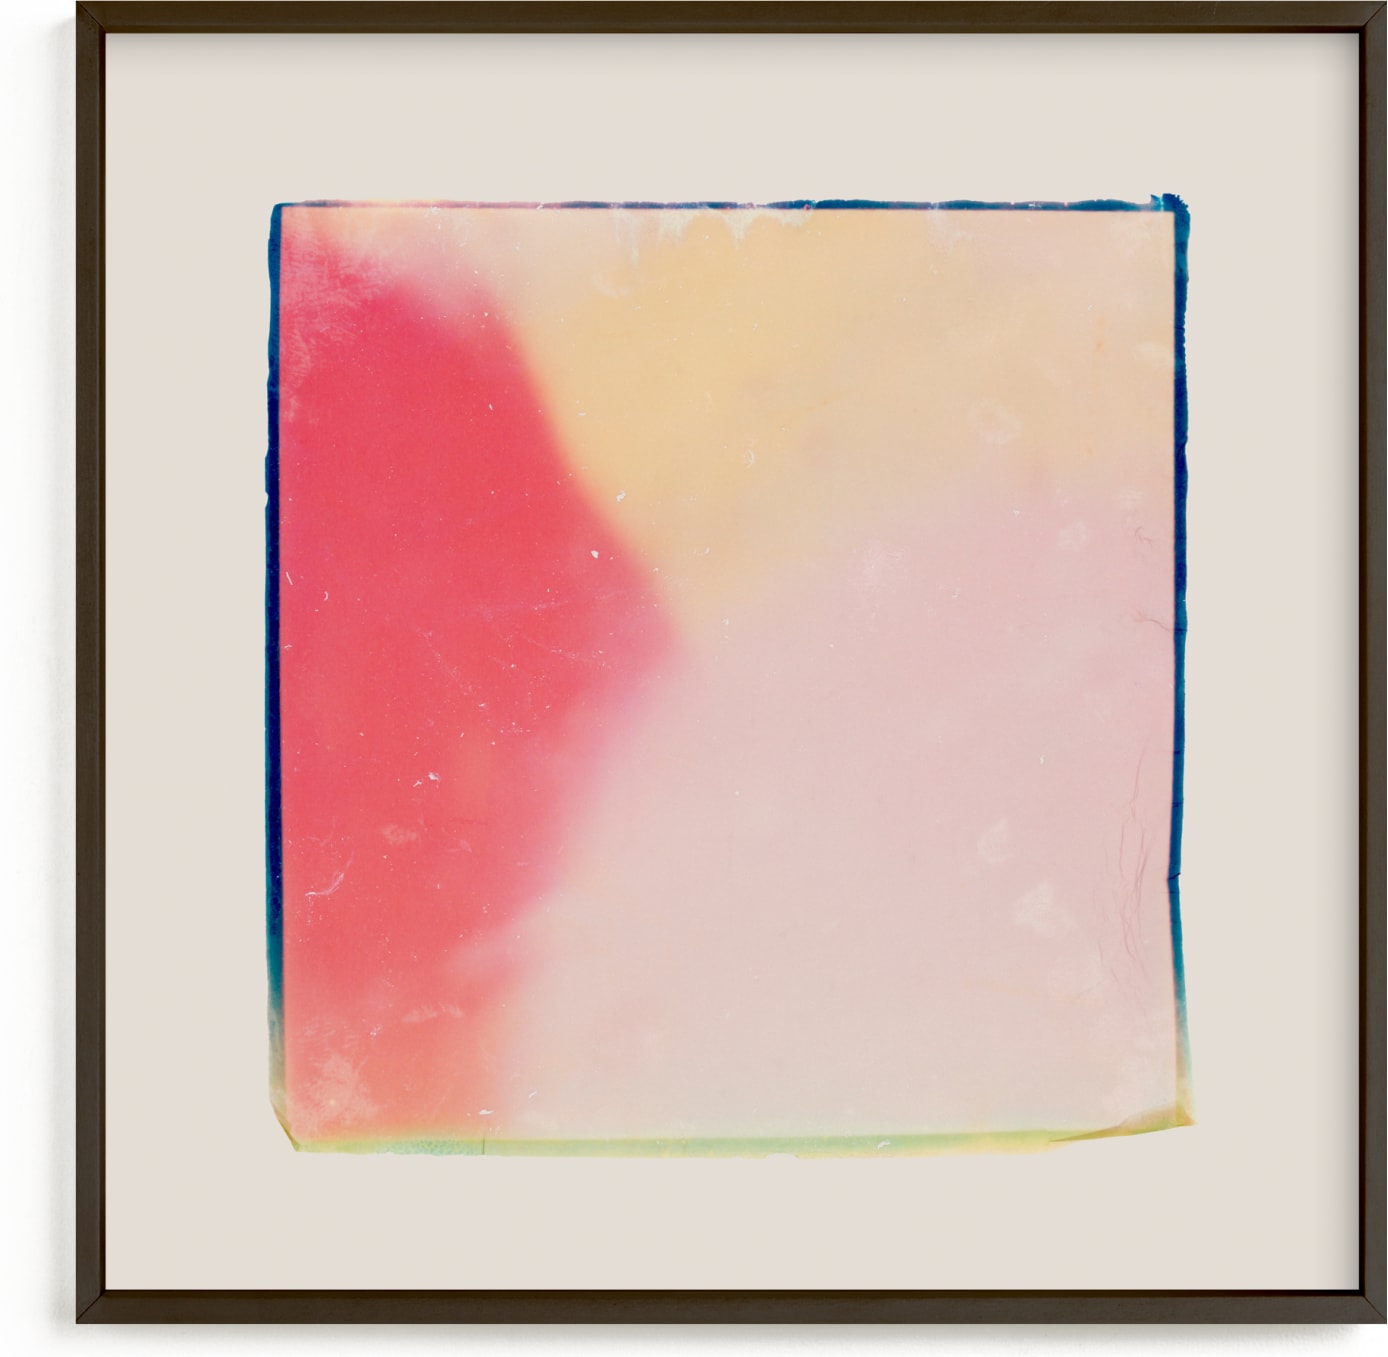 This is a yellow, pink art by Kamala Nahas called Four Square IV.